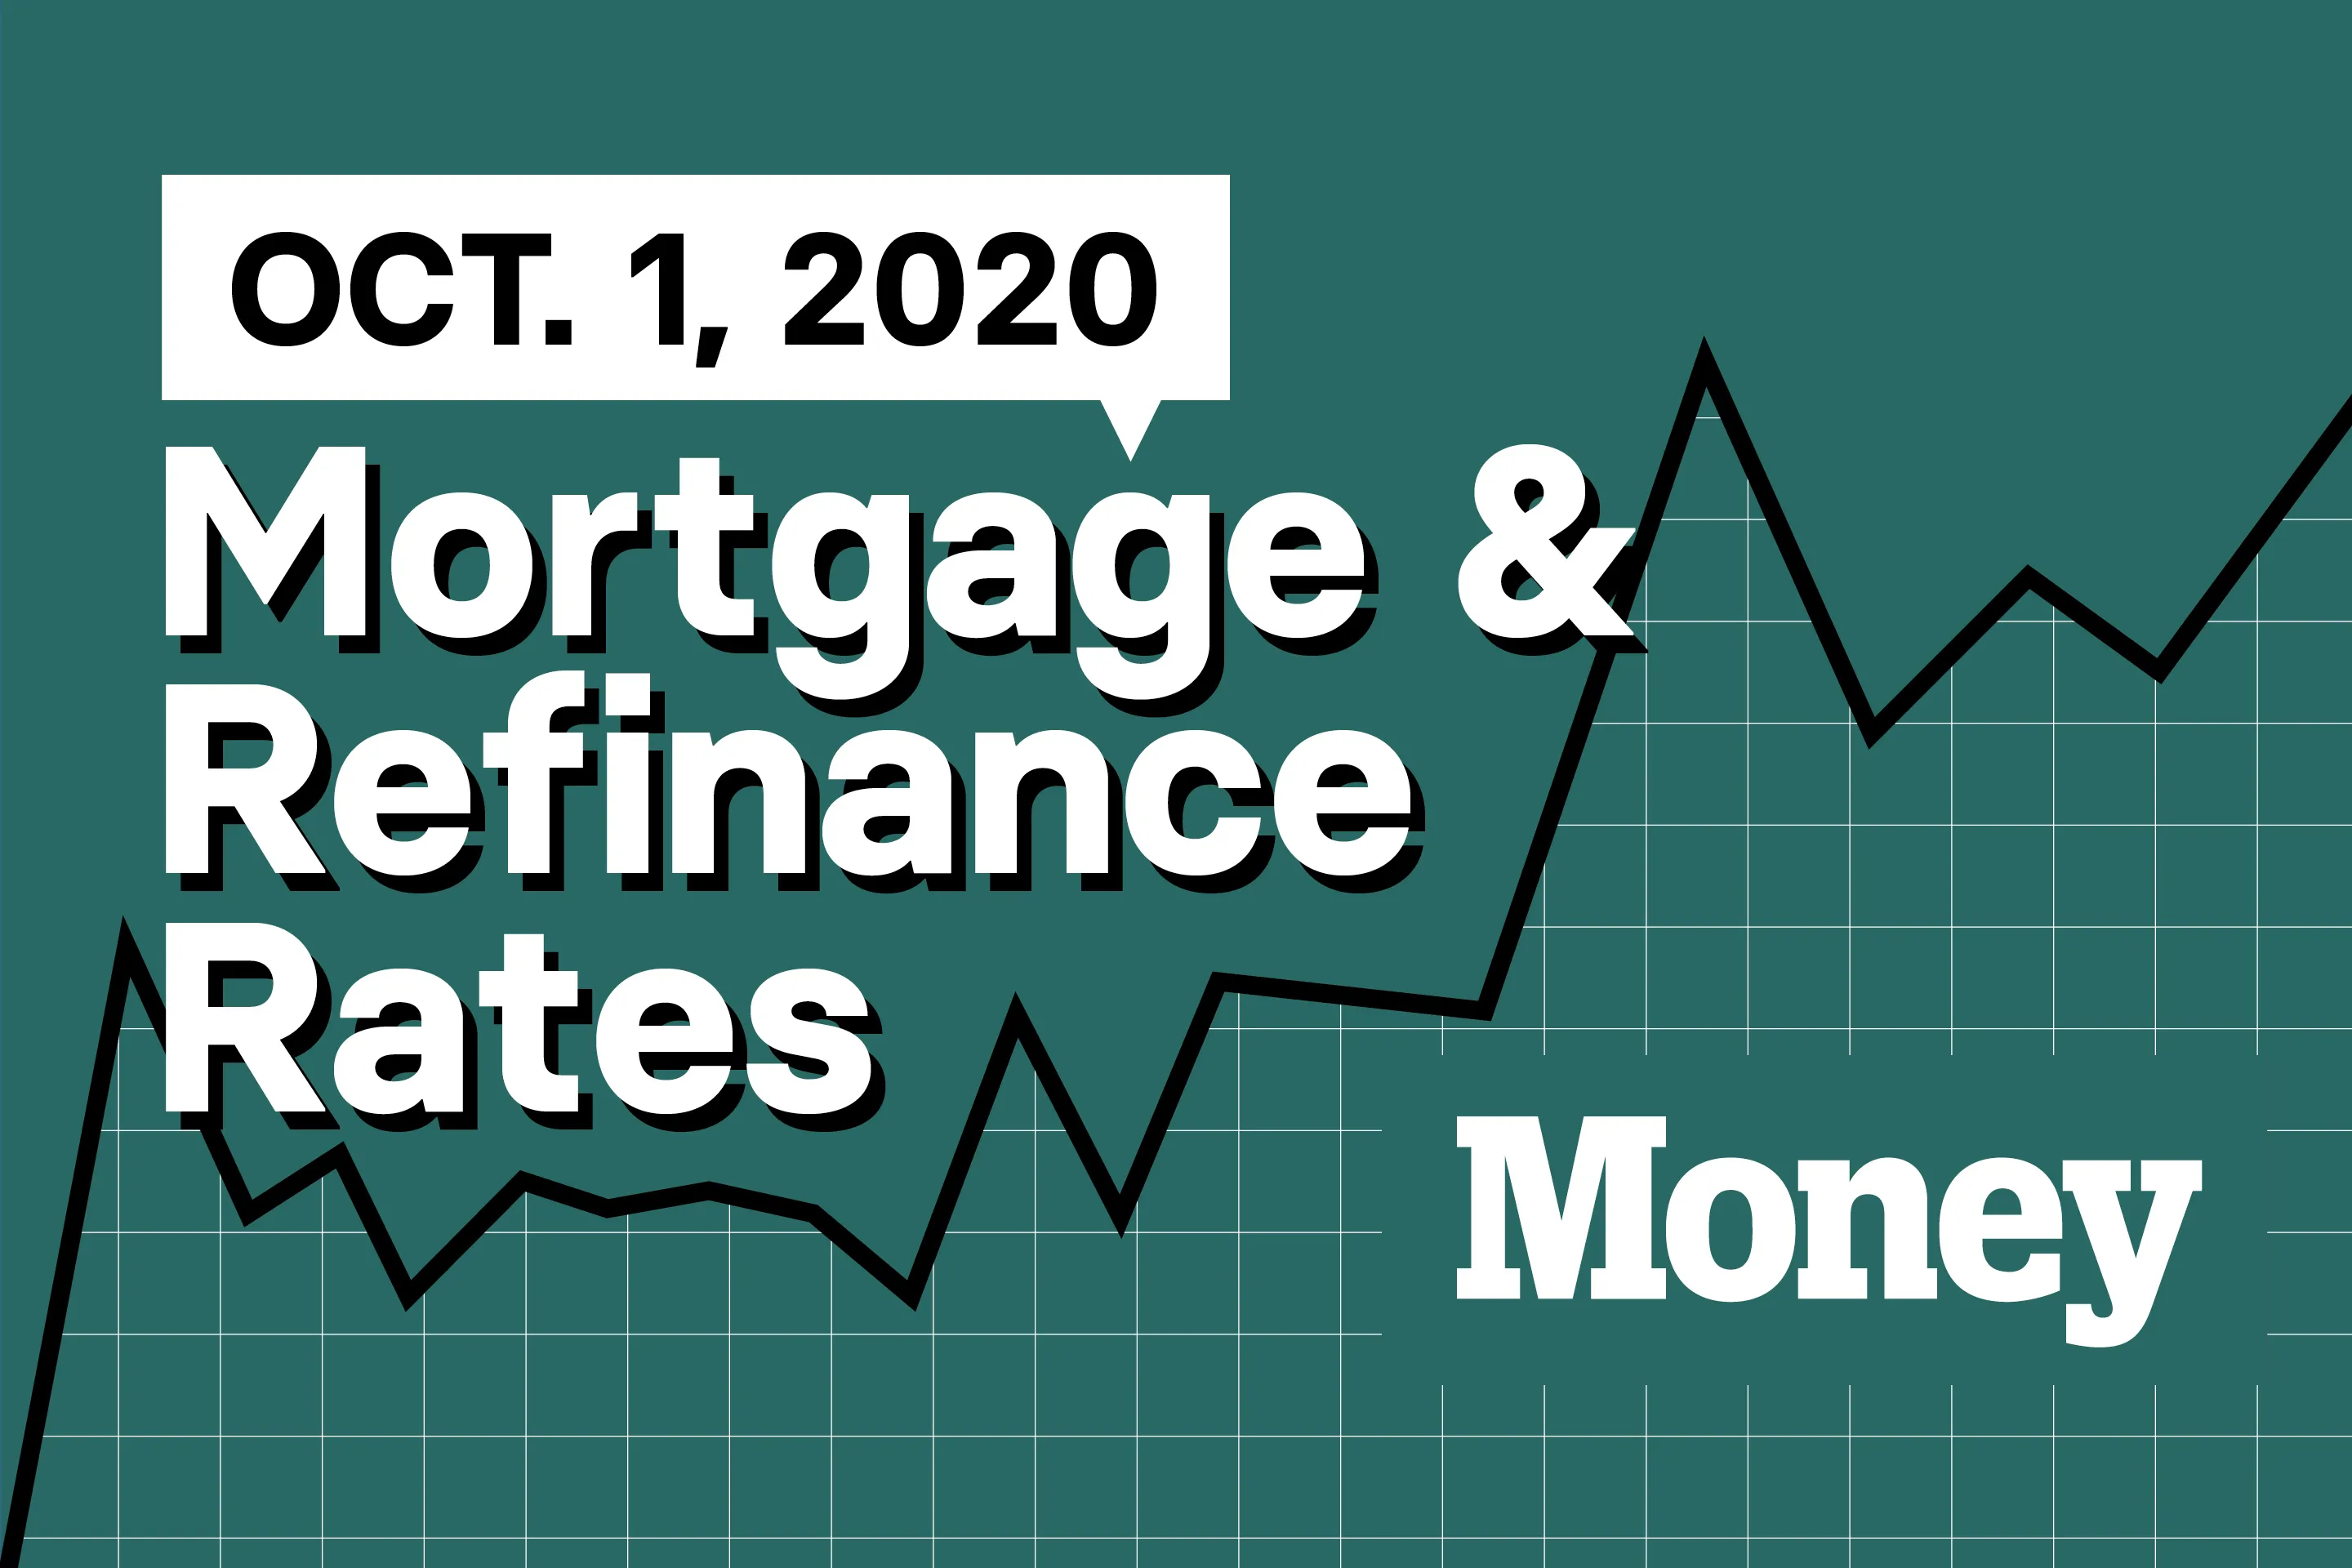 Here Are Today's Best Mortgage & Refinance Rates for October 1, 2020